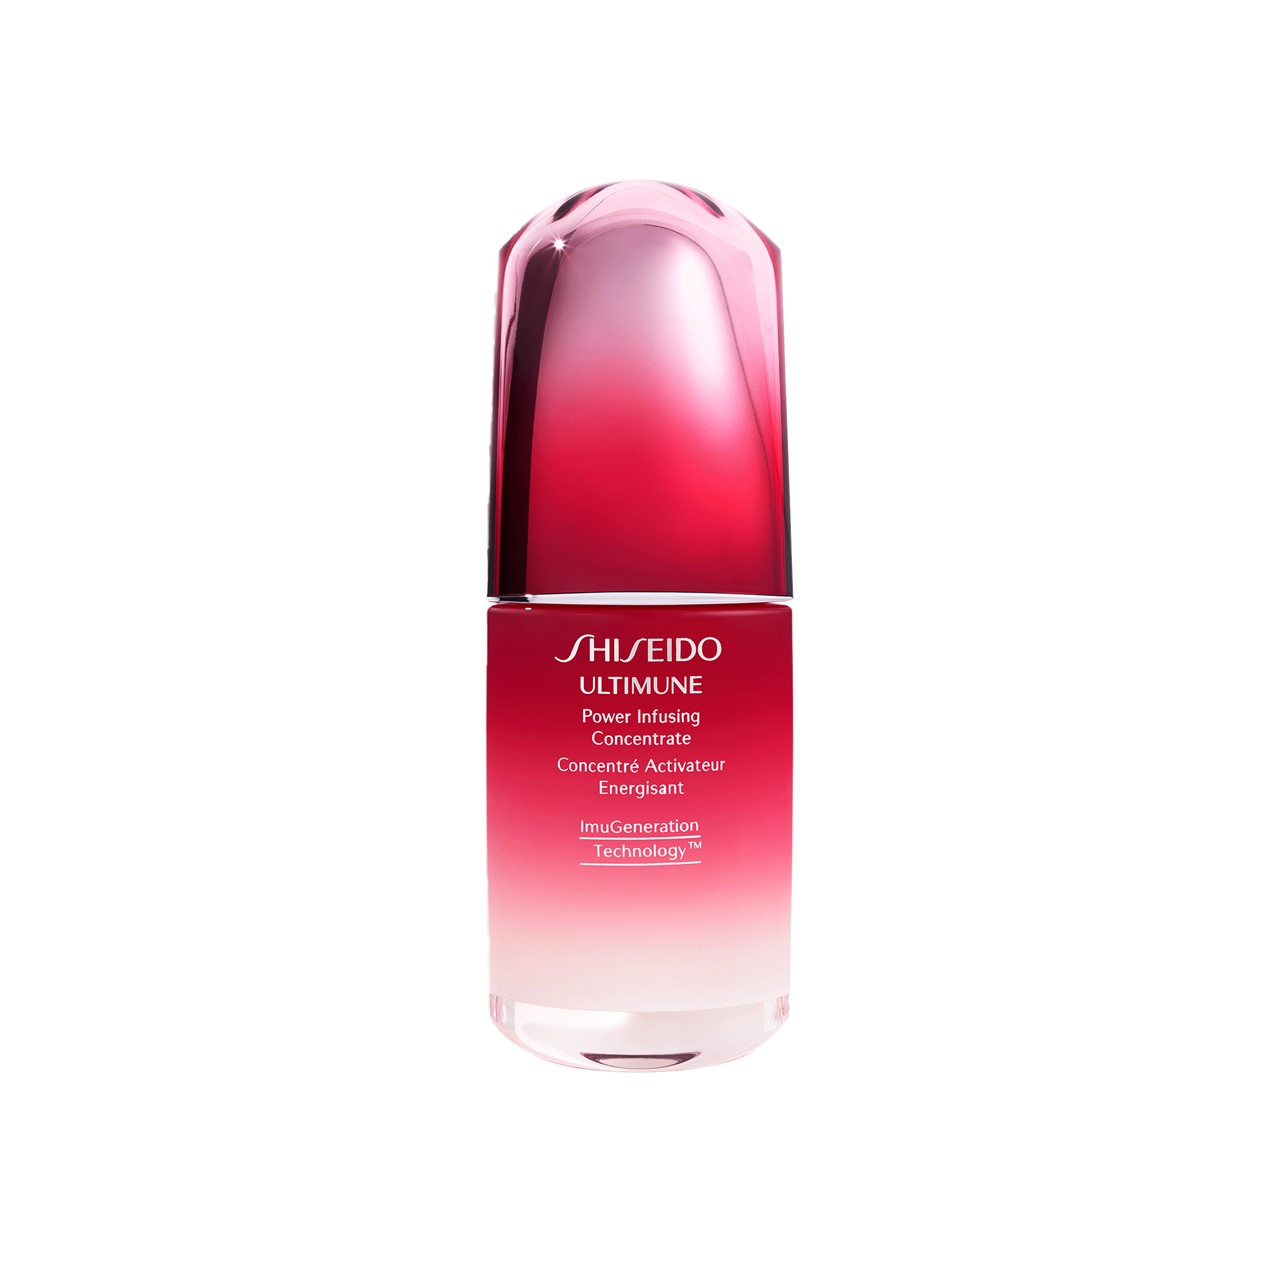 Shiseido Ultimune Power Infusing Concentrate 50ml (1.69fl oz)